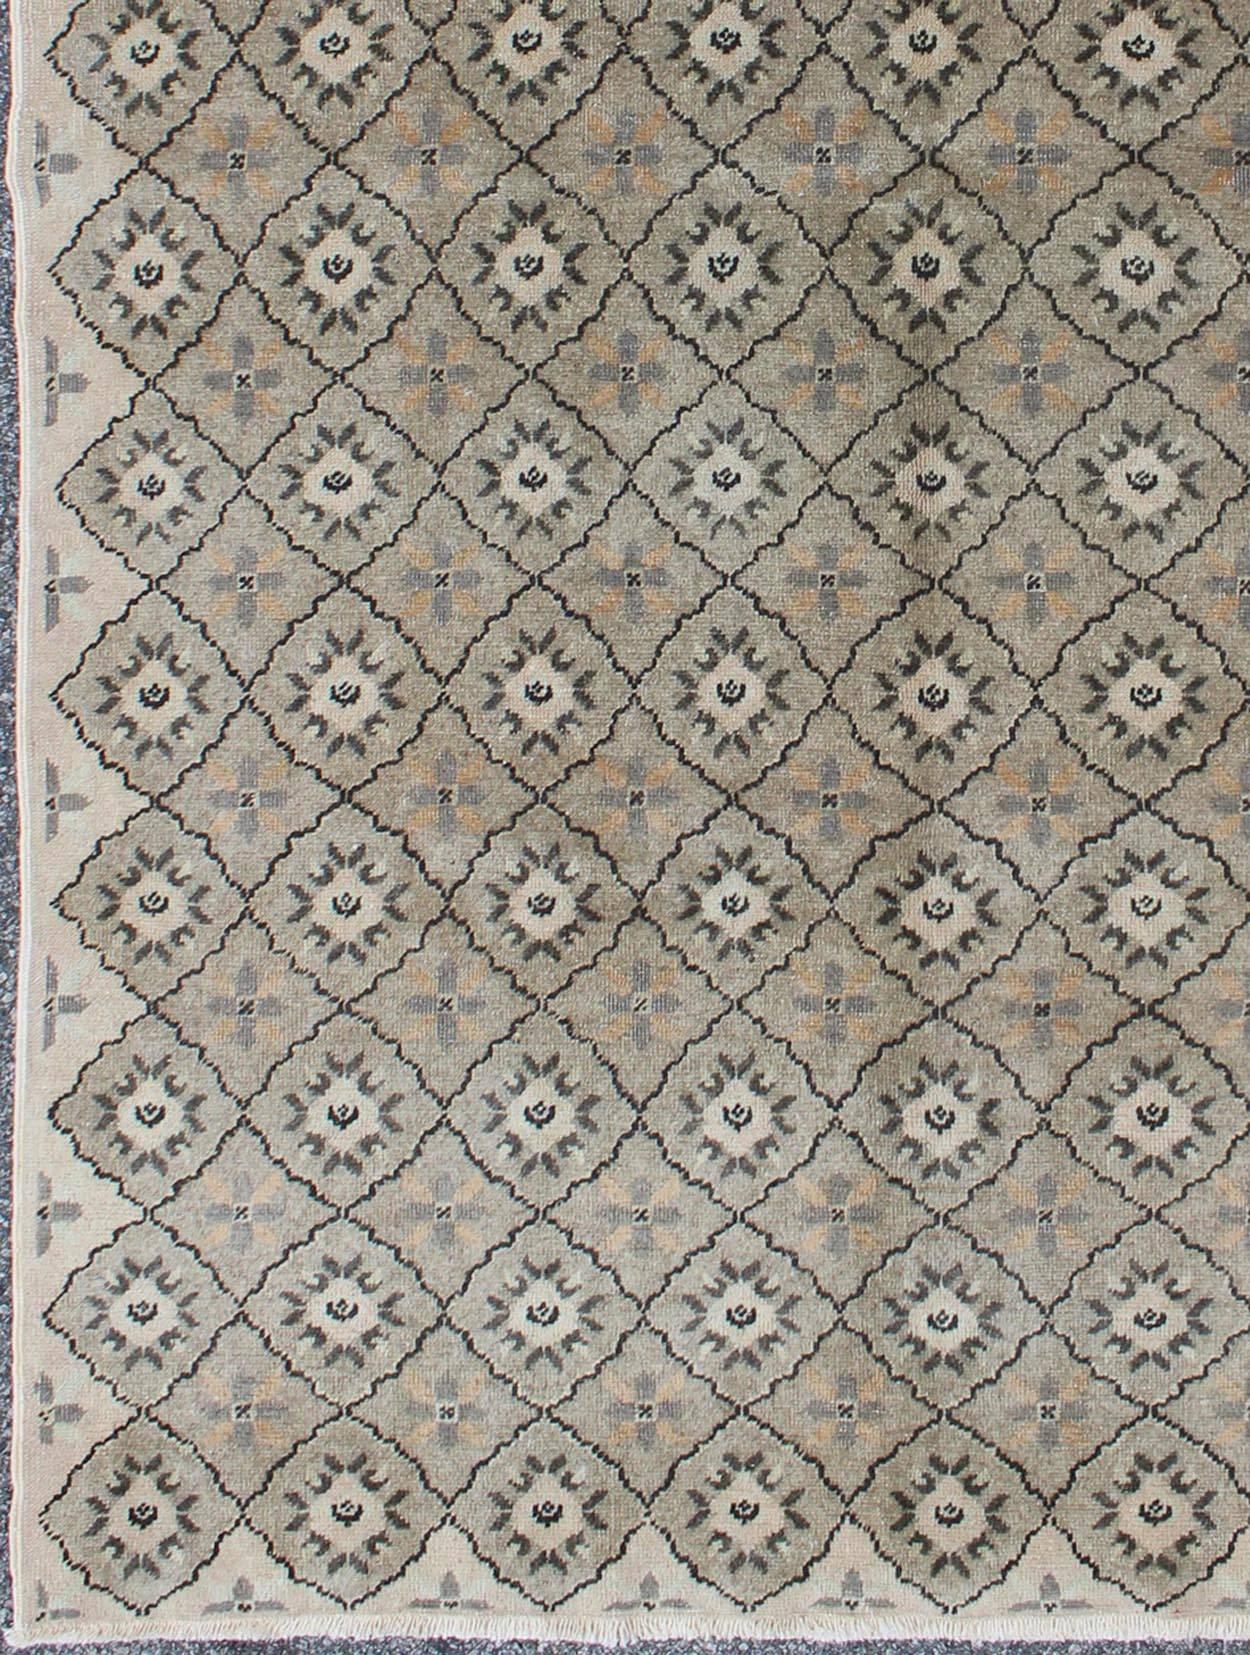 Vintage Turkish Sivas rug with all-over stylized diamond motifs in gray, Keivan Woven Arts / rug ALG-136570, country of origin / type: Turkey / Sivas, circa mid-20th century

Stylized motifs are featured in a repeating pattern on this vintage Sivas